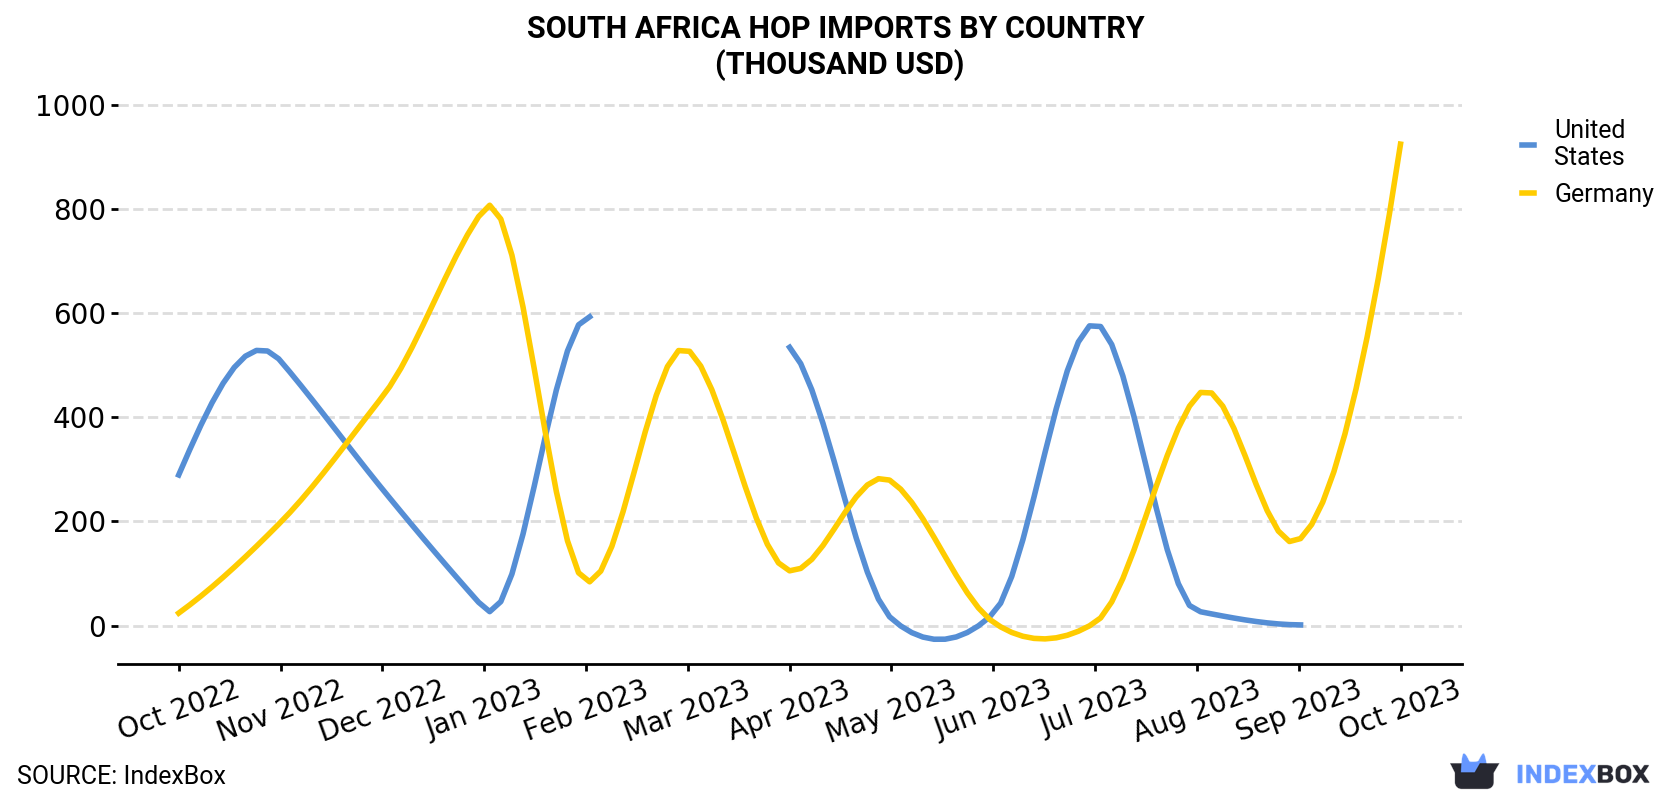 South Africa Hop Imports By Country (Thousand USD)